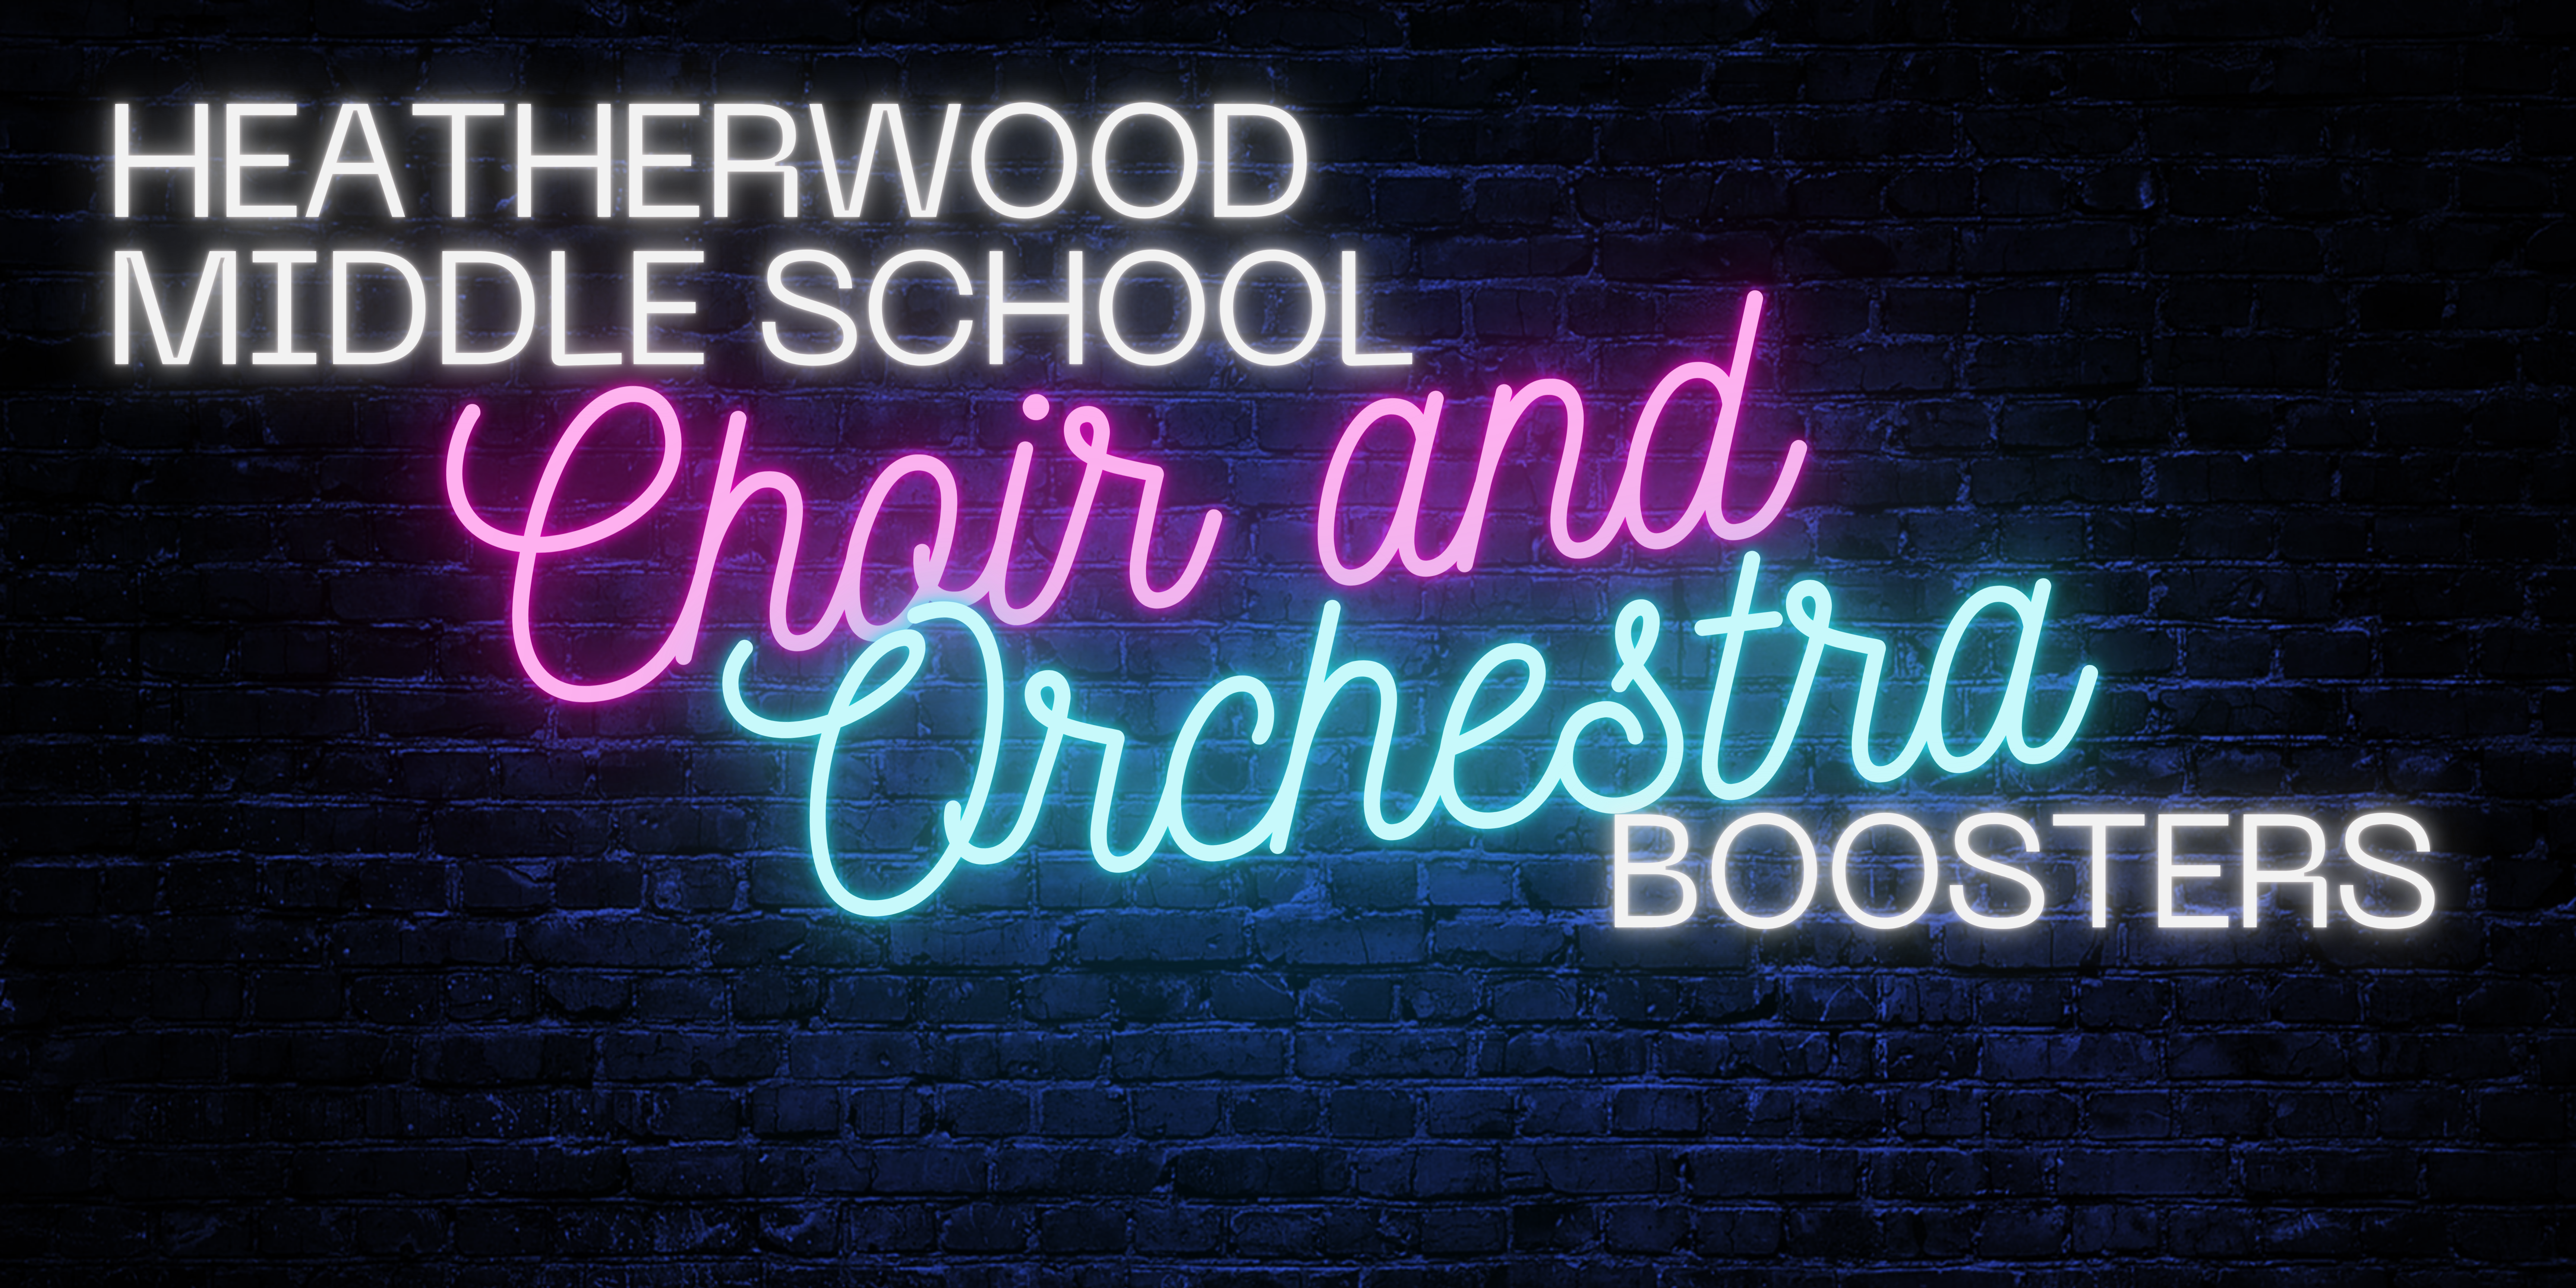 Heatherwood Choir and Orchestra Boosters